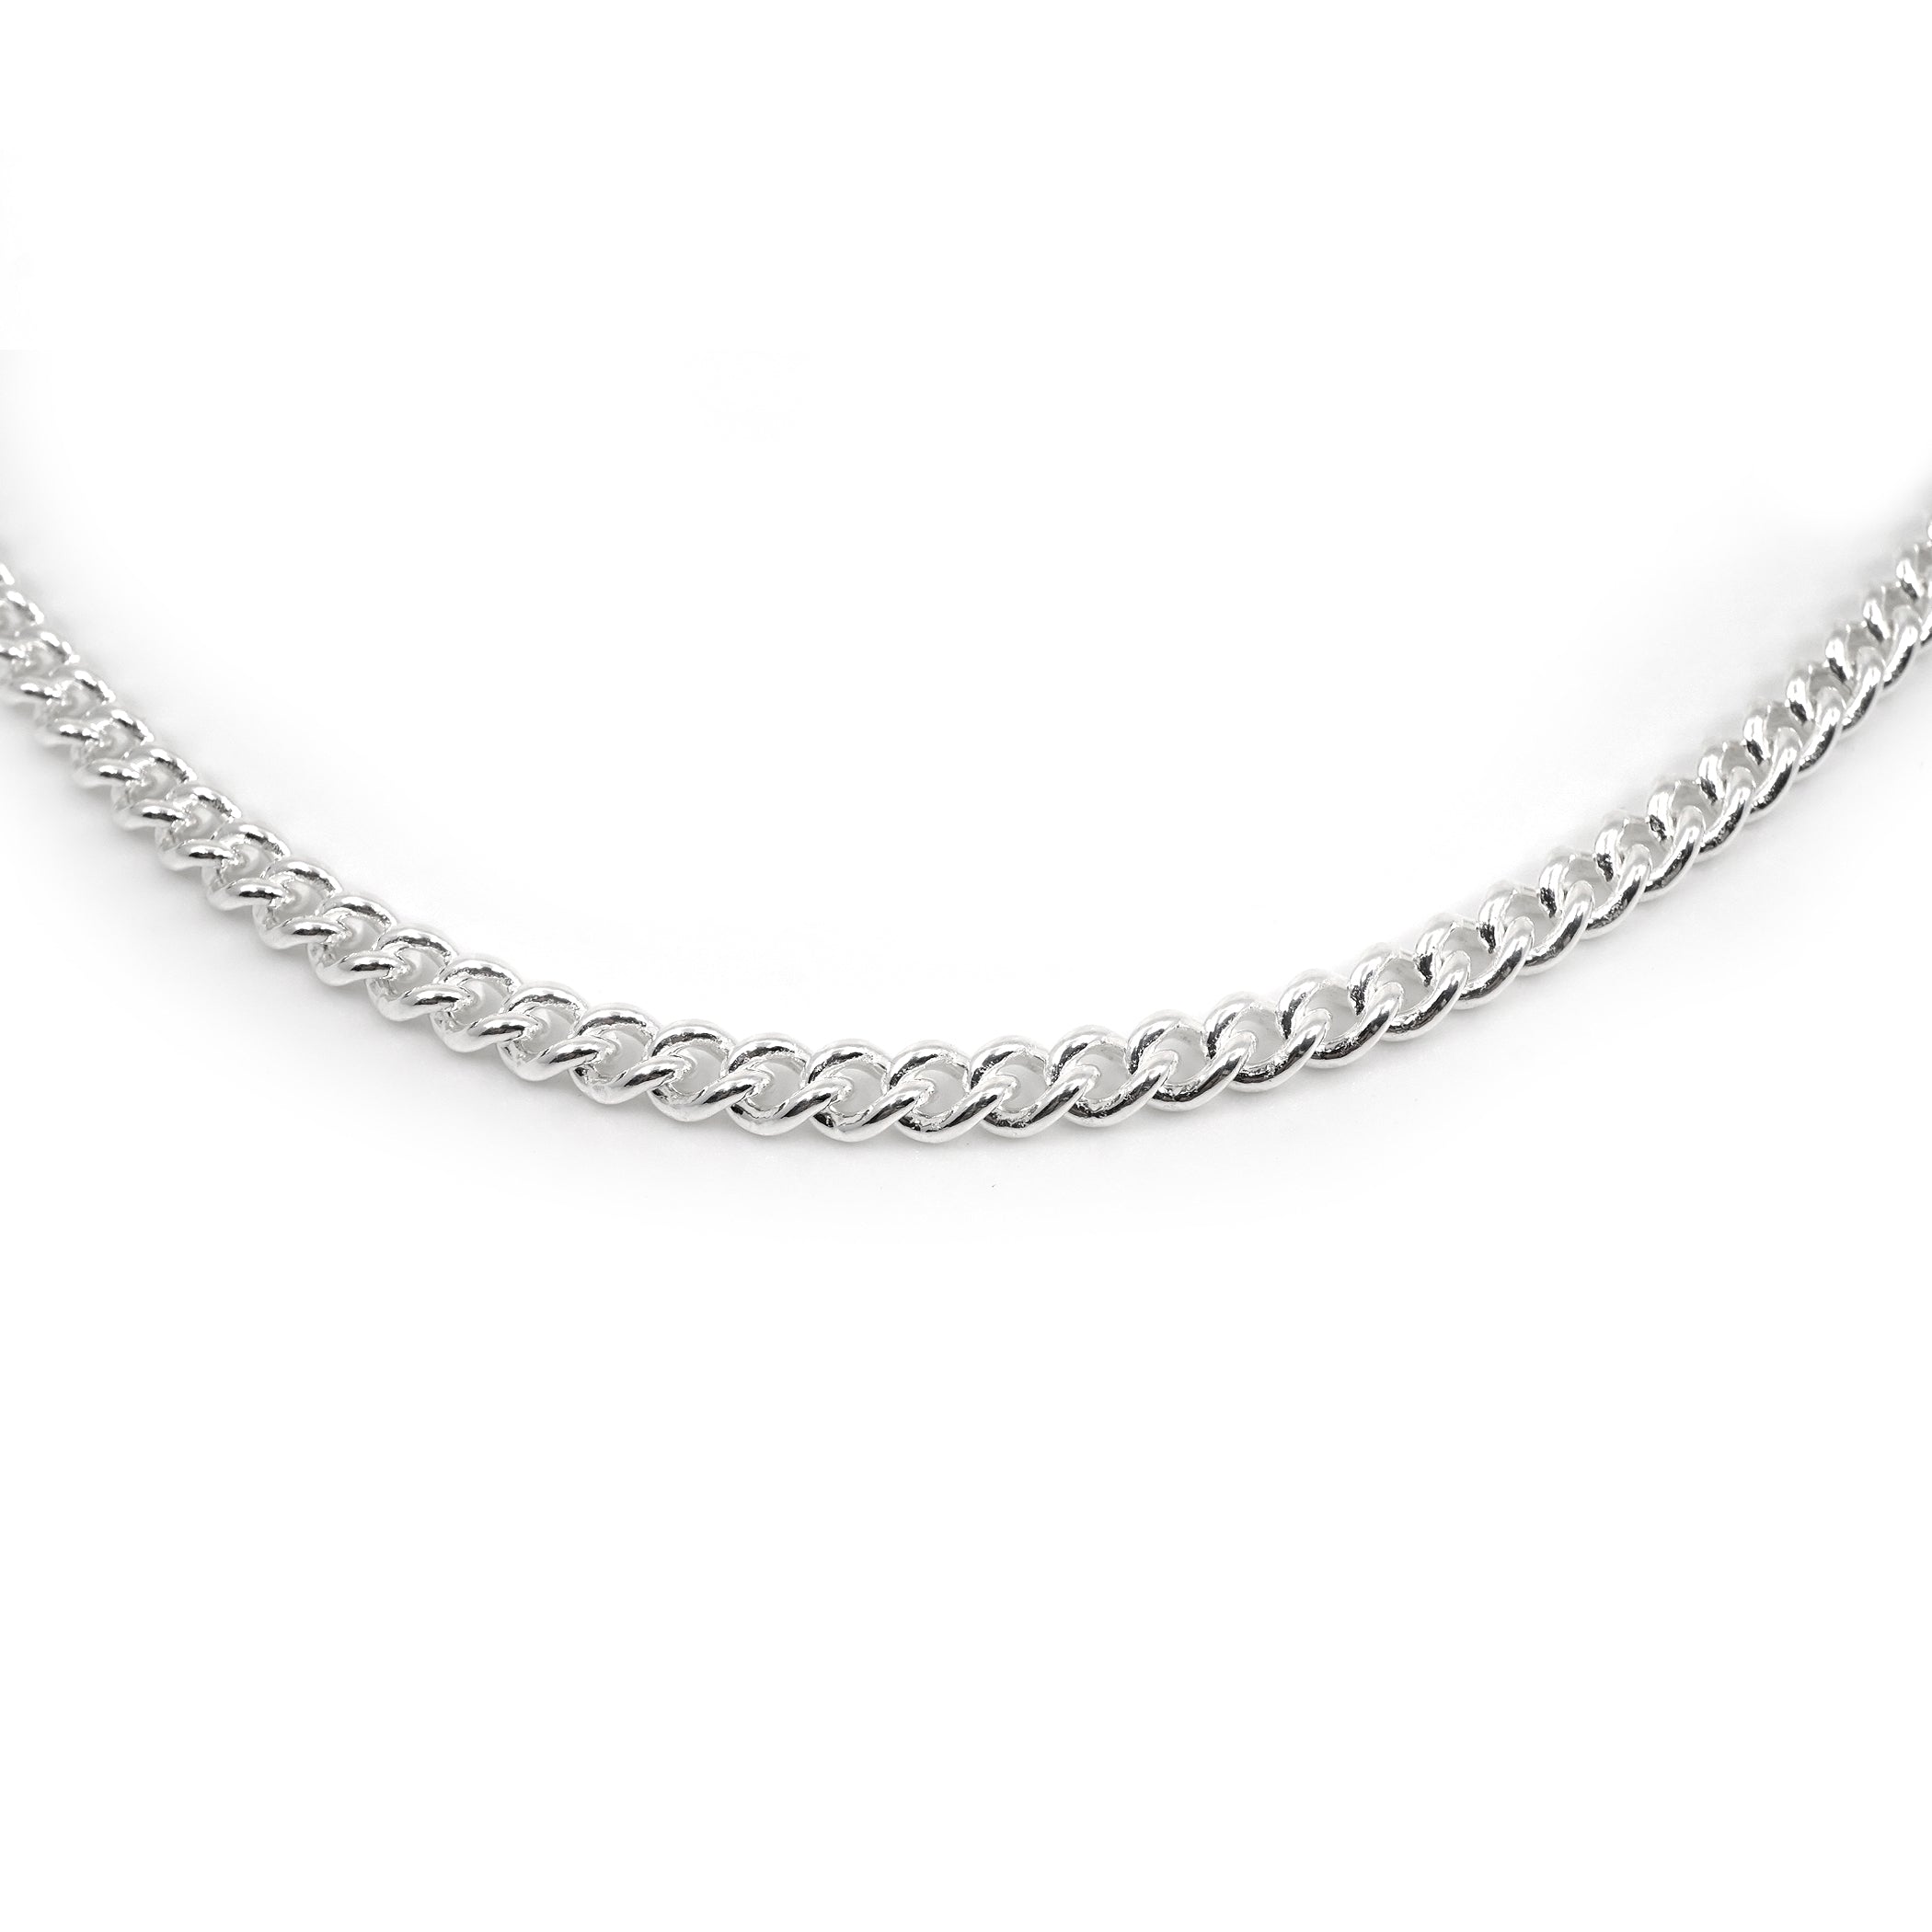 Thick Curb Chain Link Necklace | Chain link necklace, Top selling jewelry,  Chain